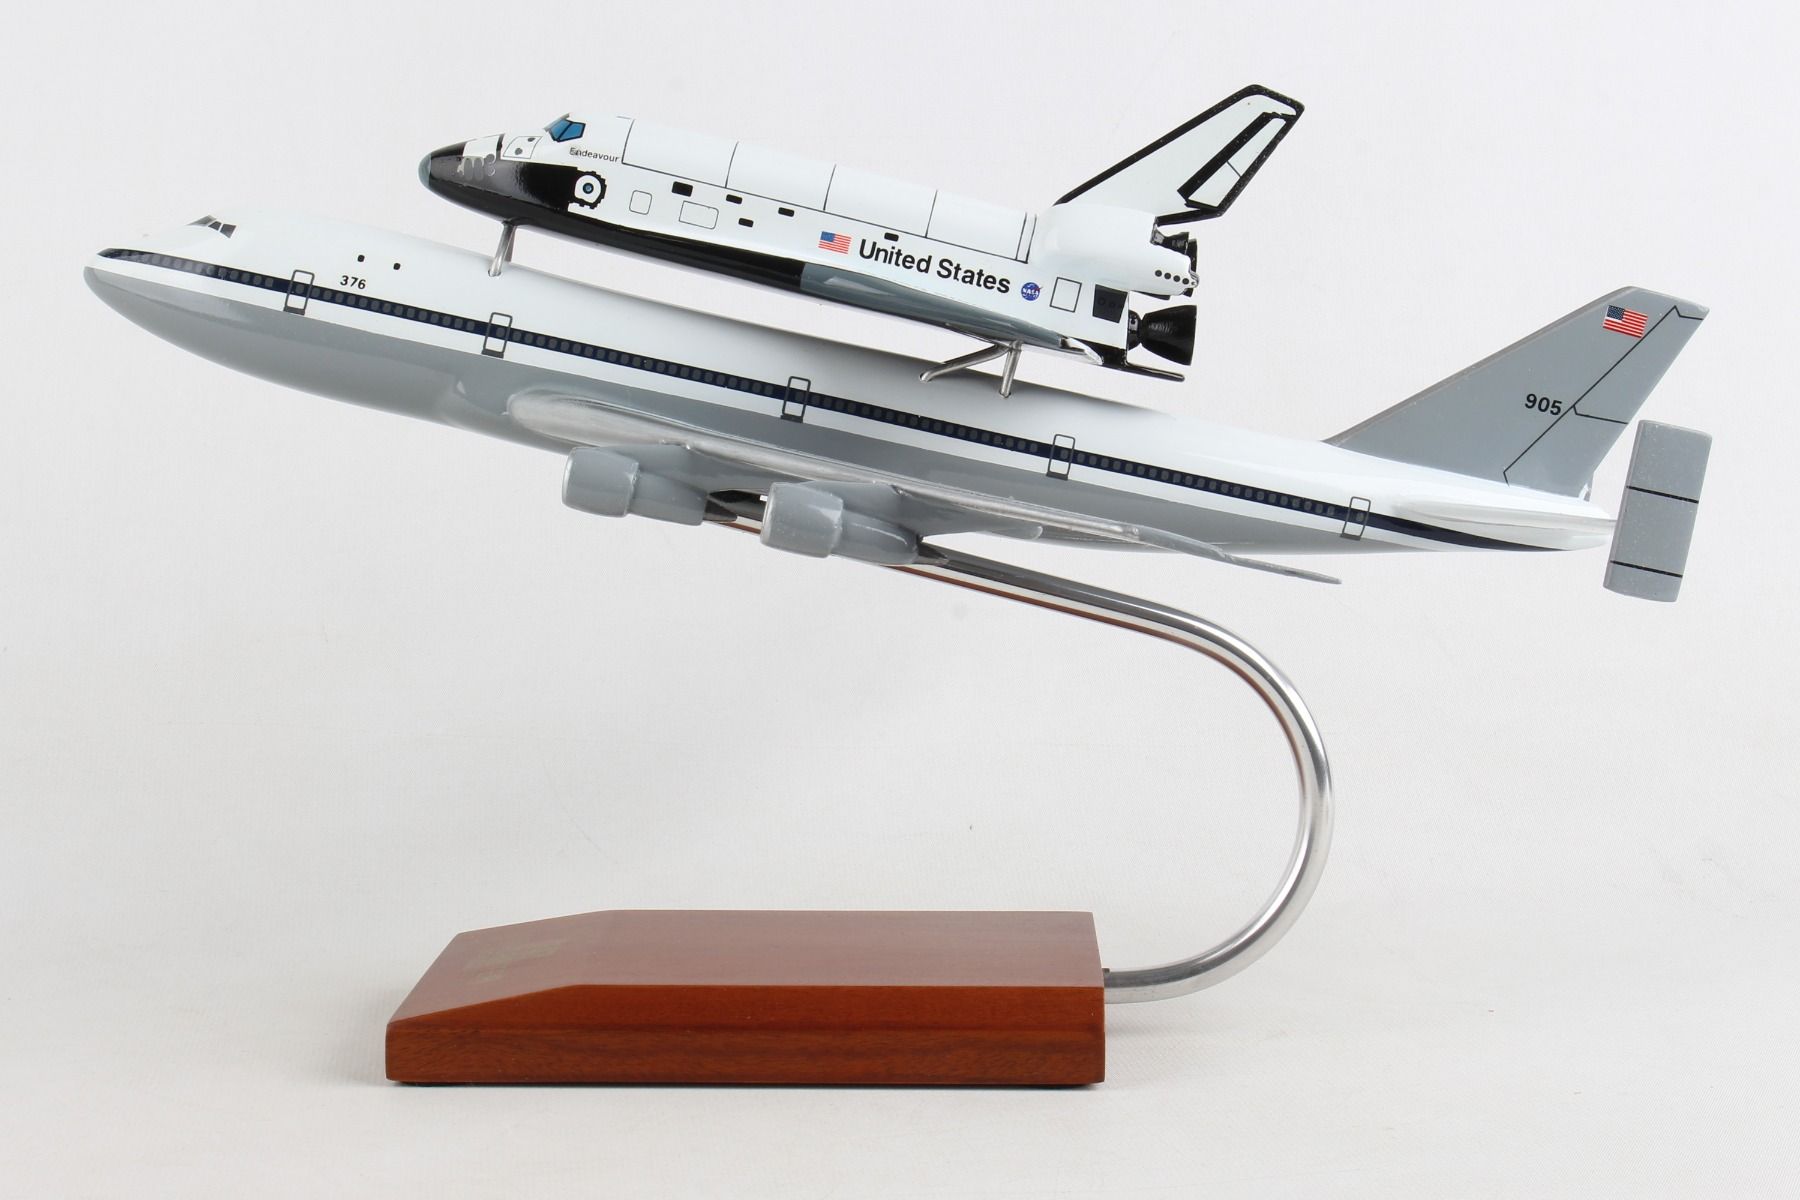 ALDO Creative Arts Collectibles Scale Model NASA Boeing B-747 Carrier With Space Shuttle Endeavour  Model Aircraft